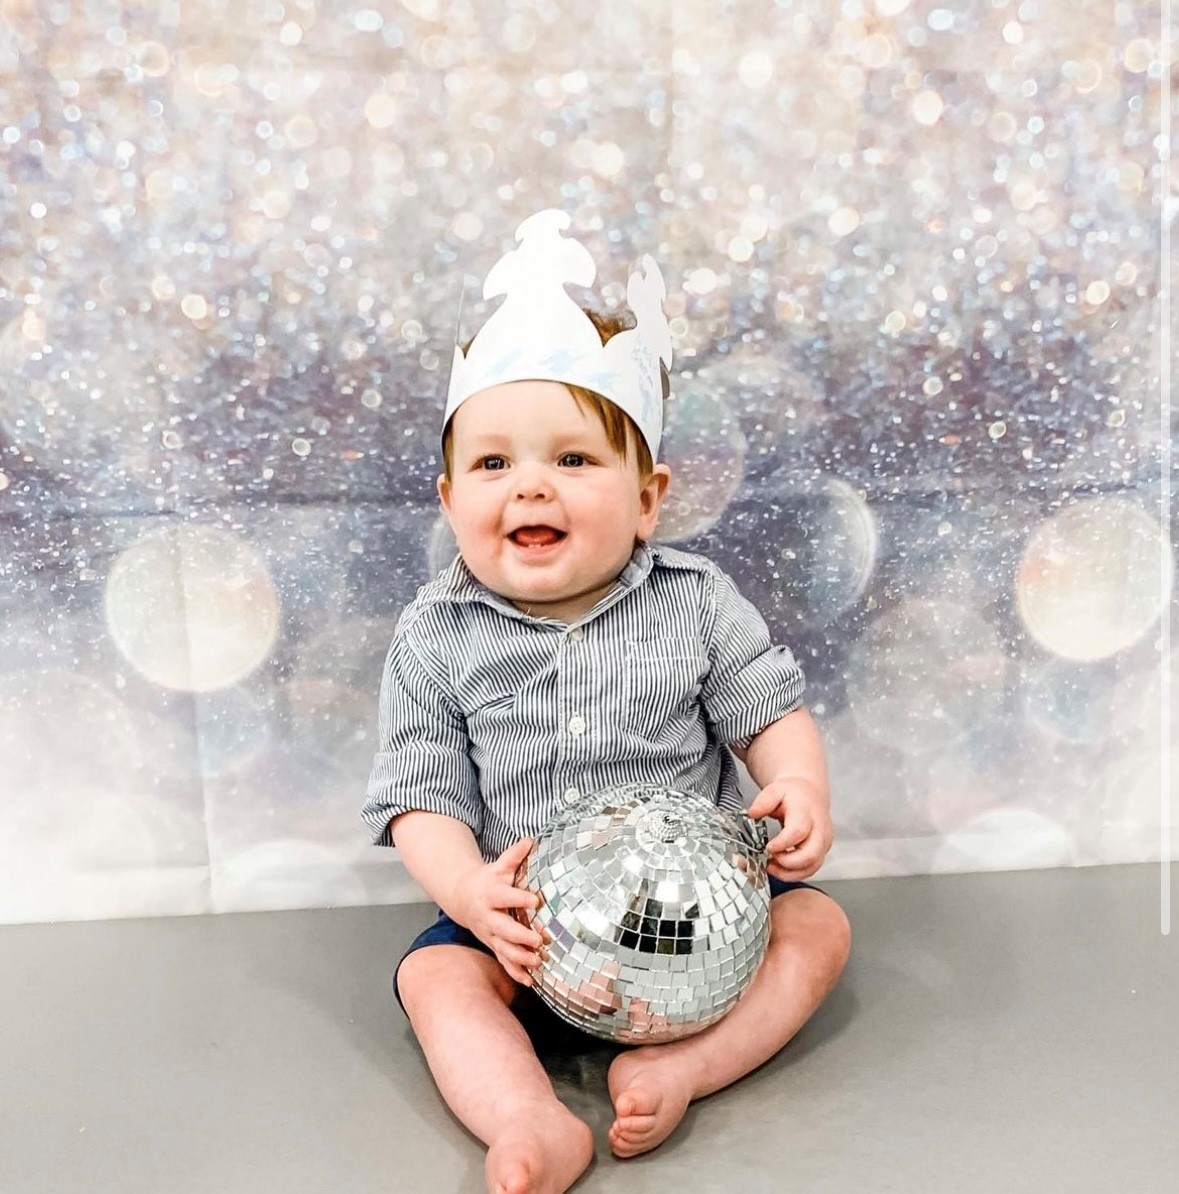 a smiling baby in a crown holds a disco ball in front of a sparkly background